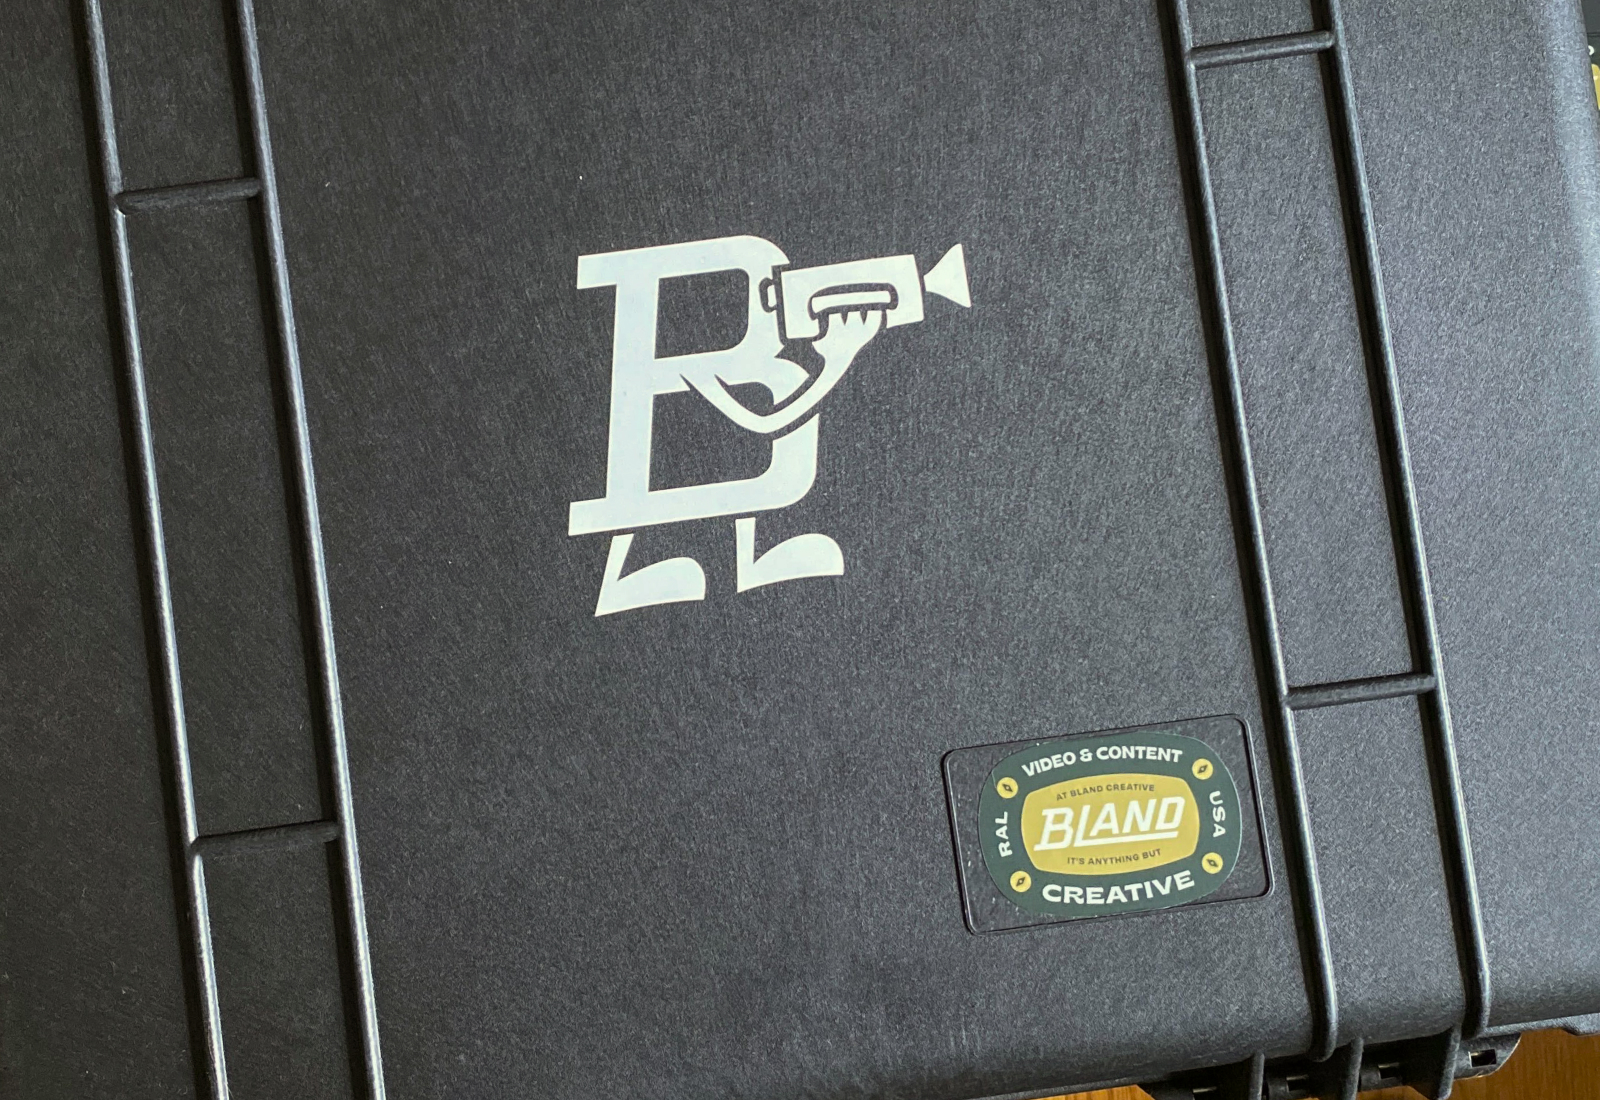 Bland Boy and Badge Logo Stickers on Equipment | Bland Creative | Brand Identity by Joey Carty at MRC